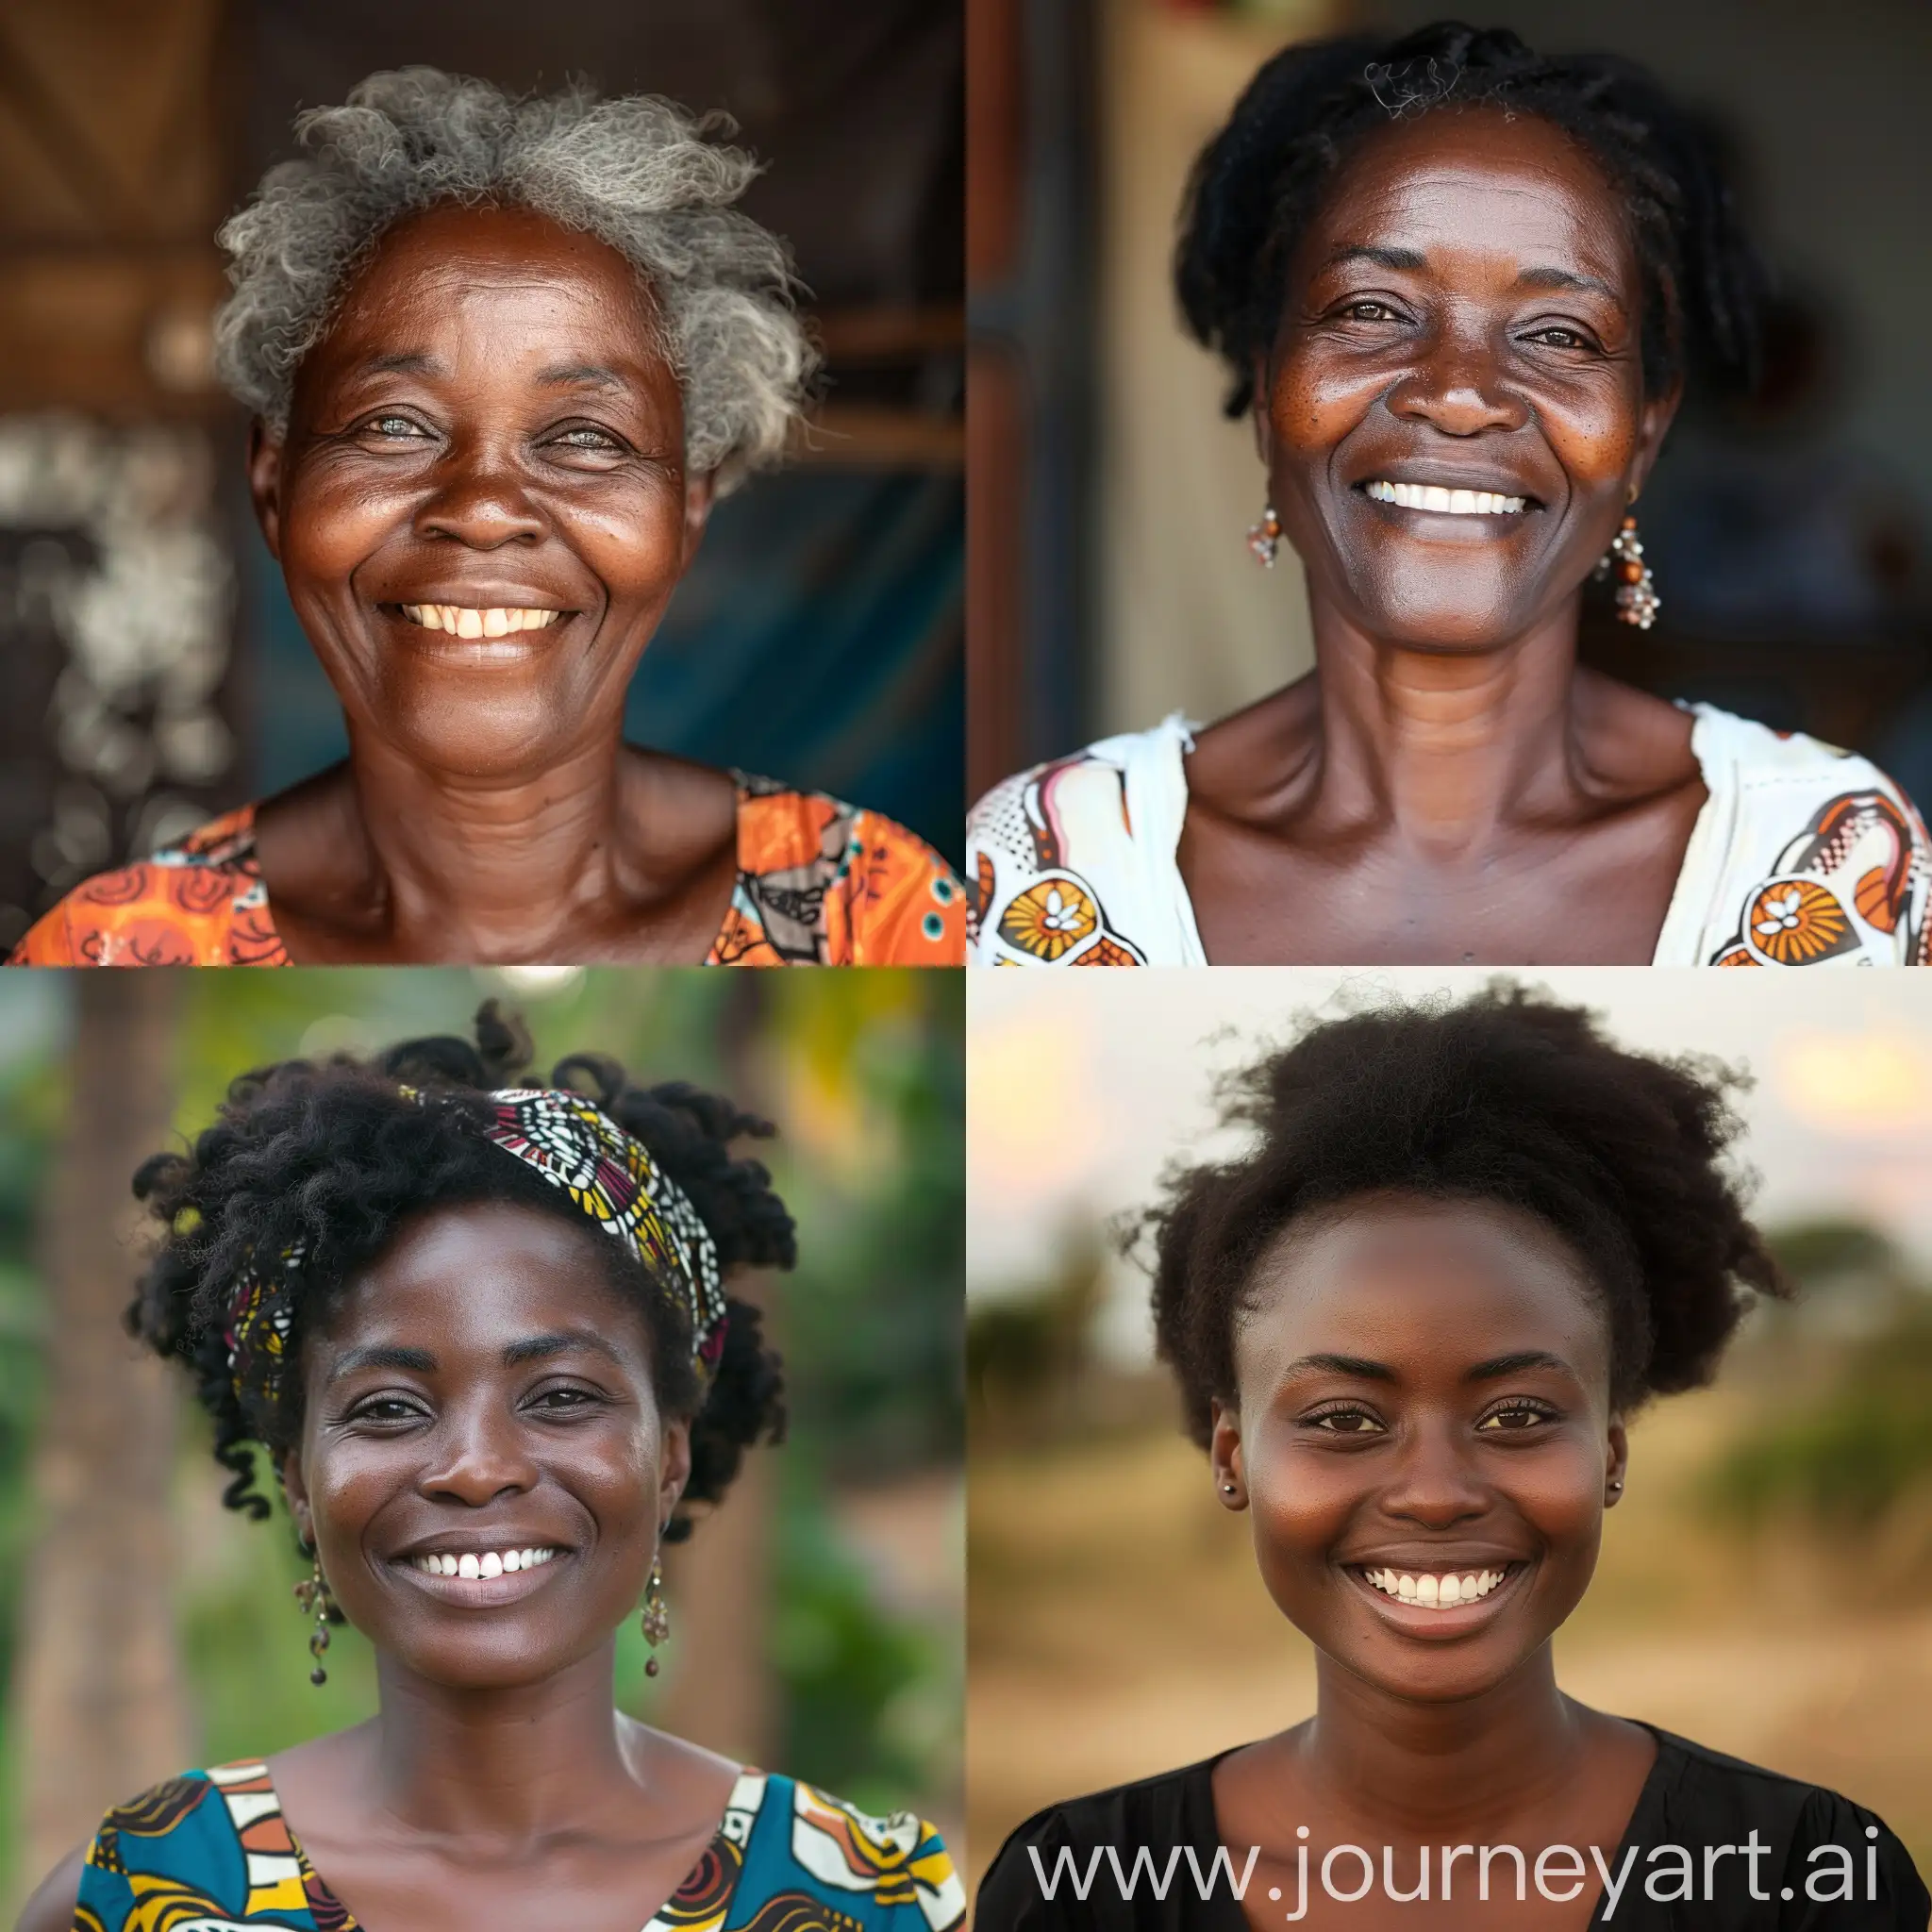 An african woman, 35 years old smiling, medium shot
